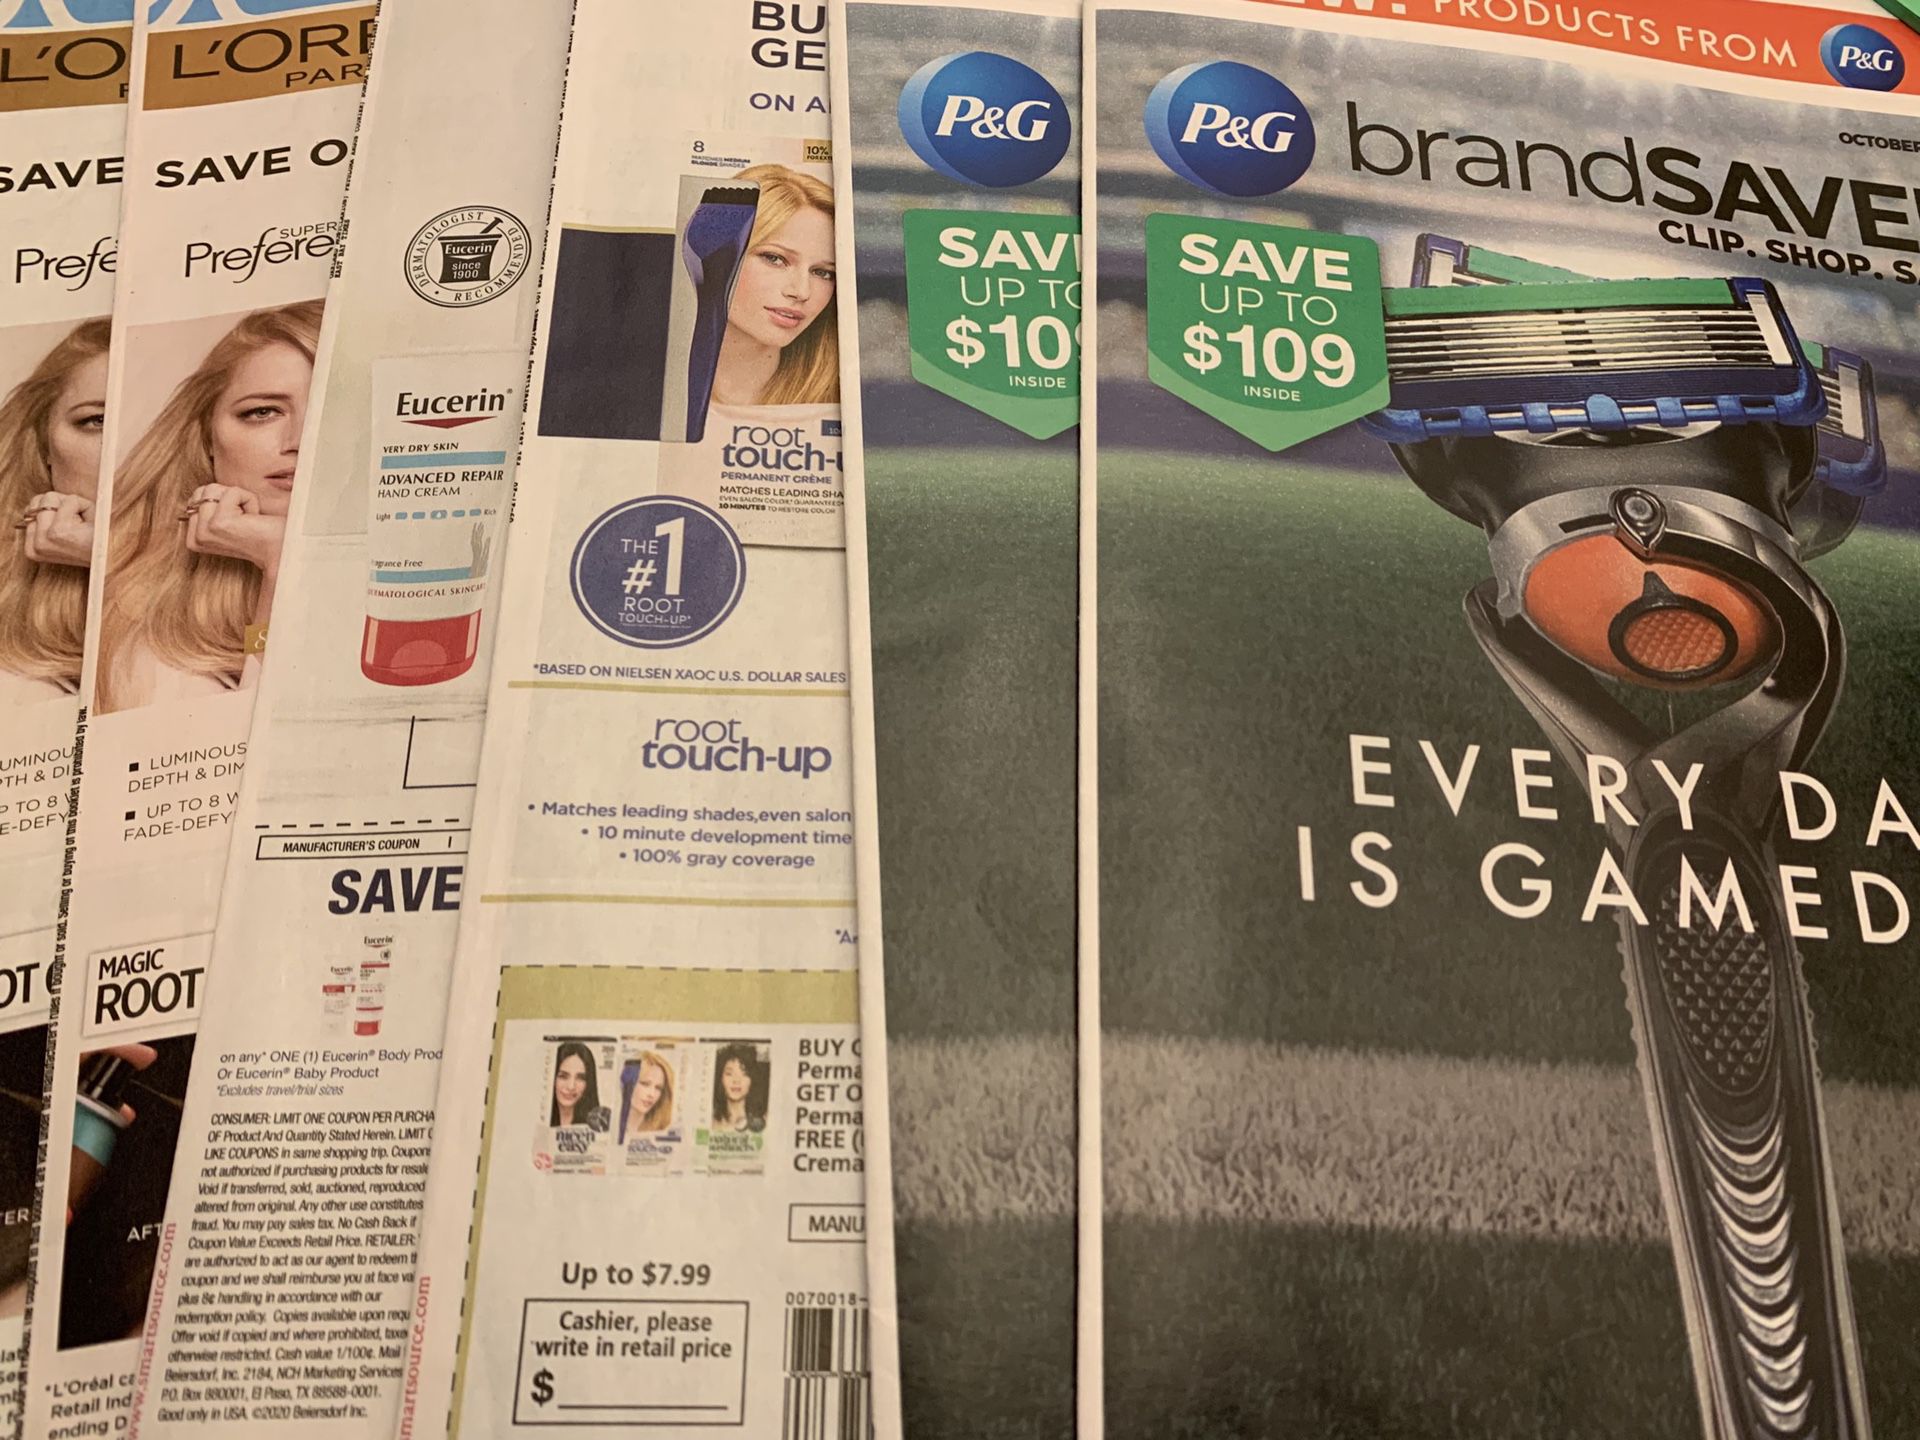 Coupon coupons inserts from Sunday papers